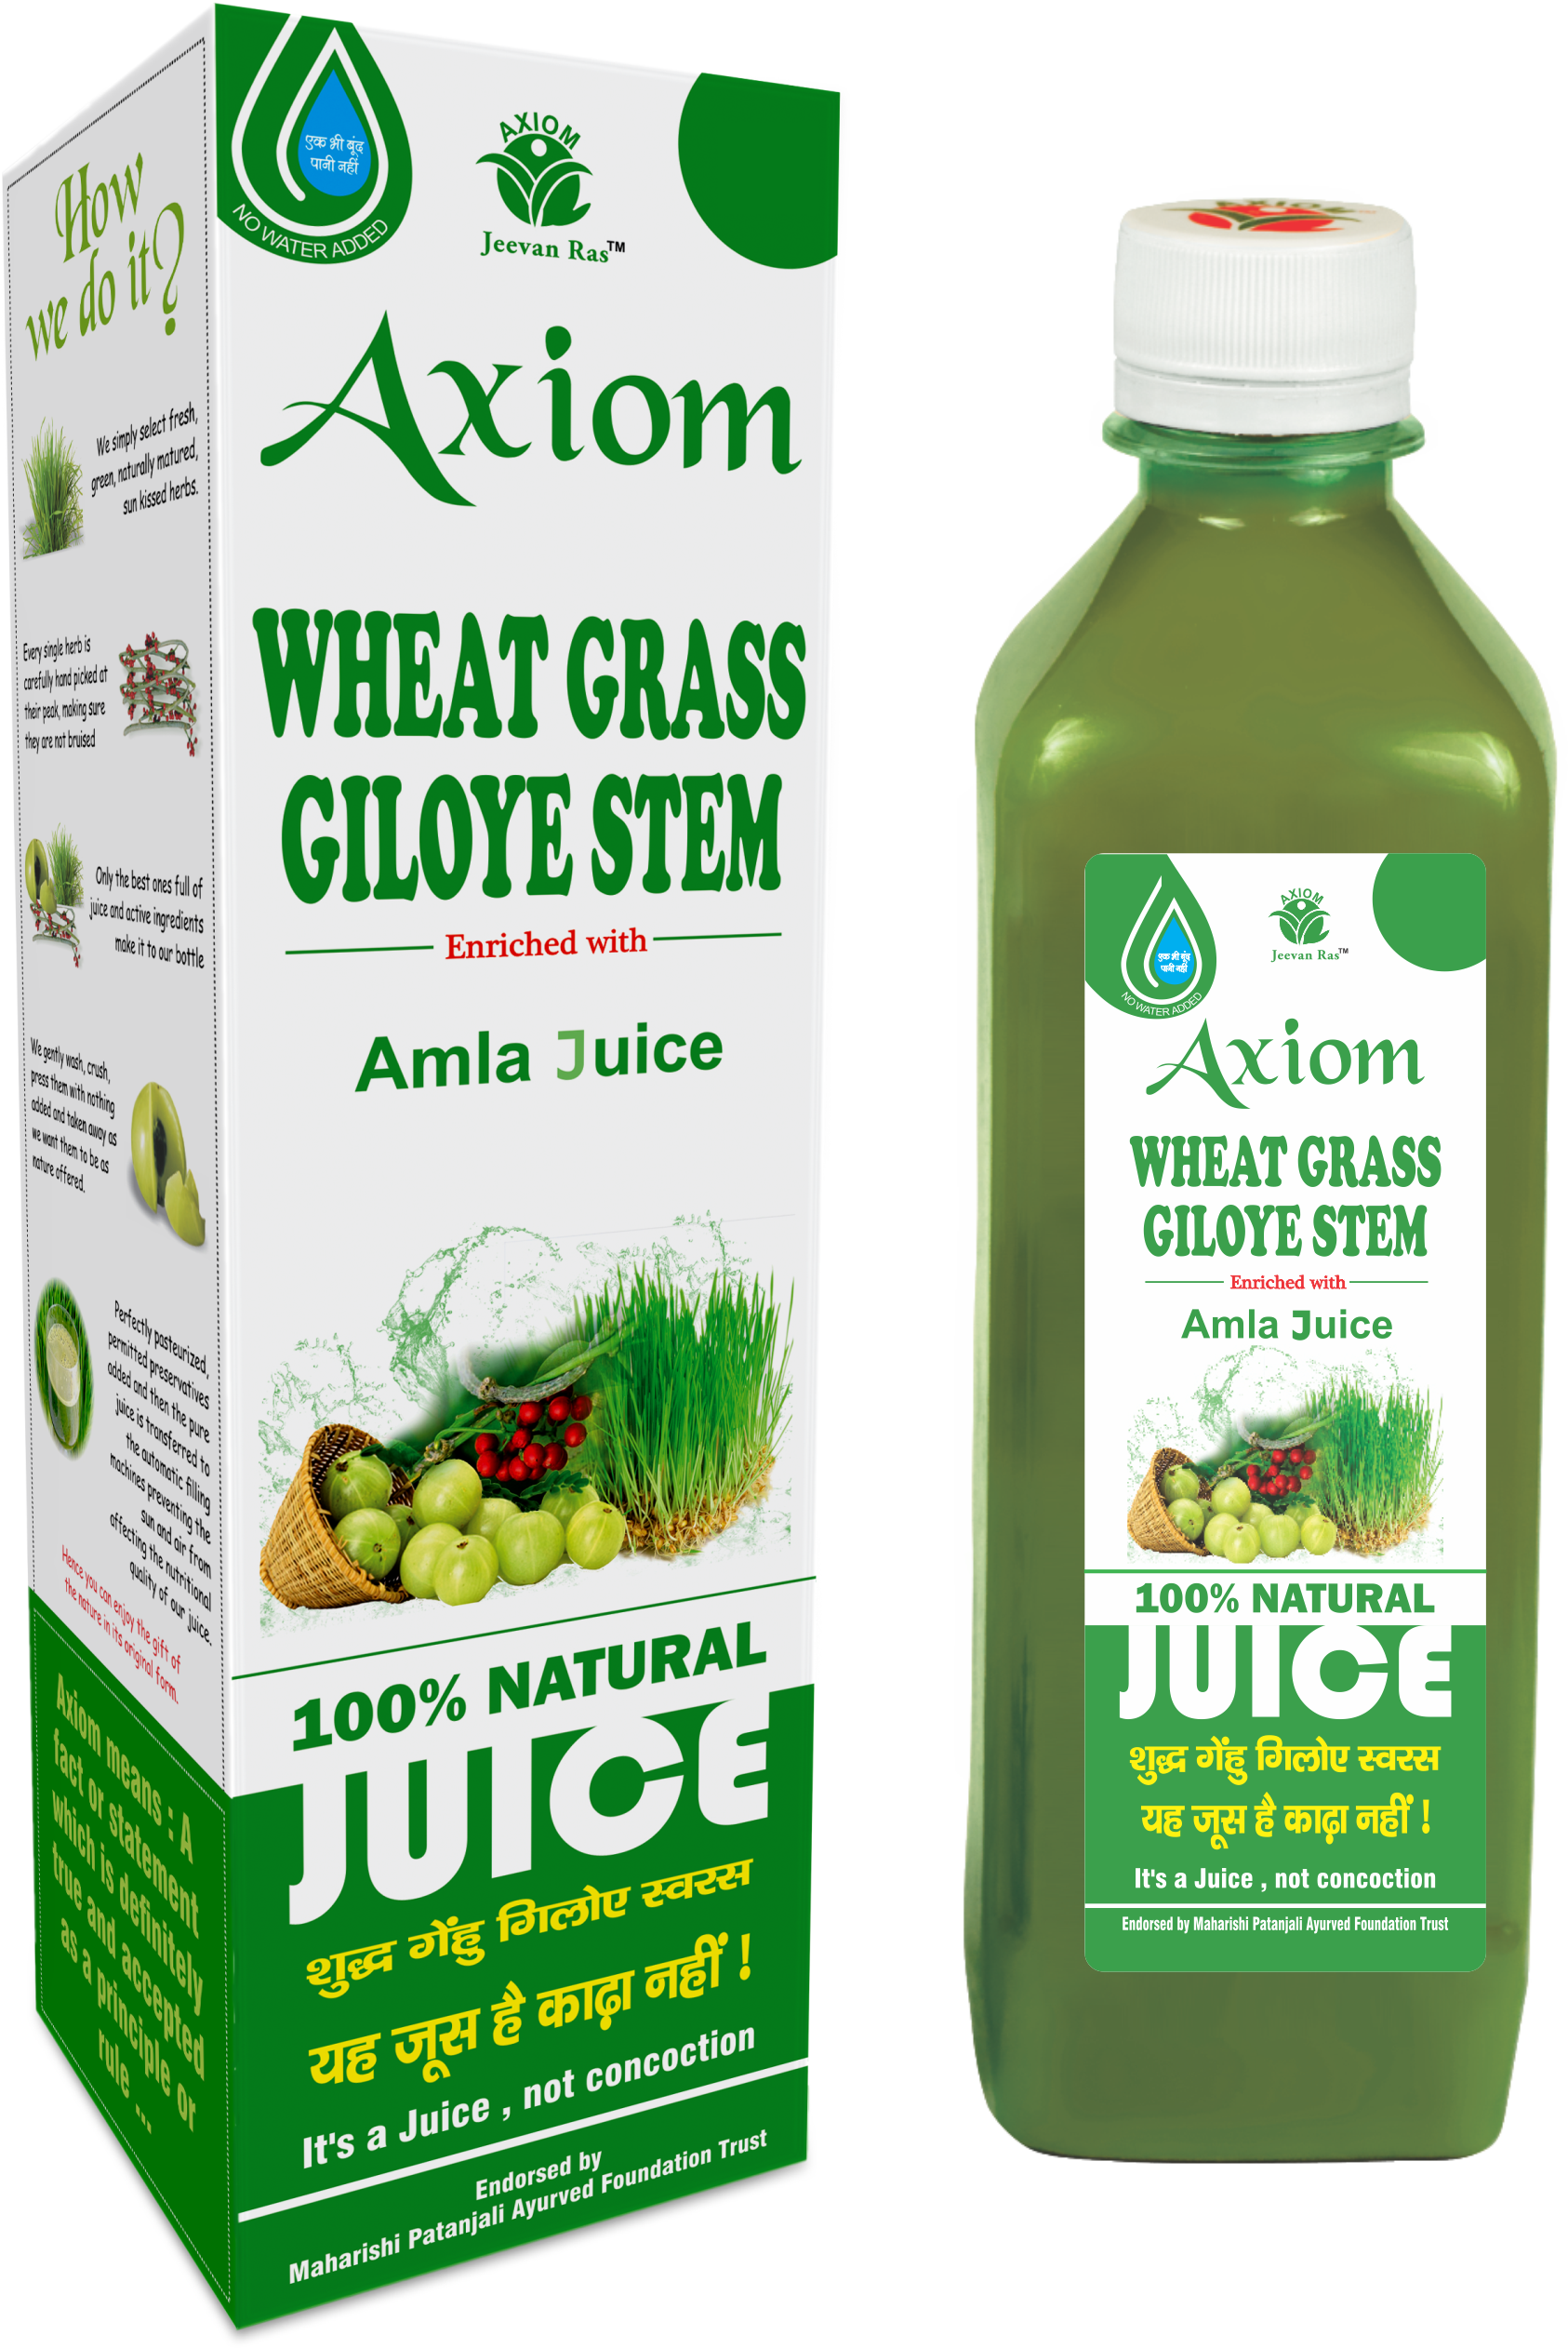 Buy Axiom Wheat Grass Juice at Best Price Online